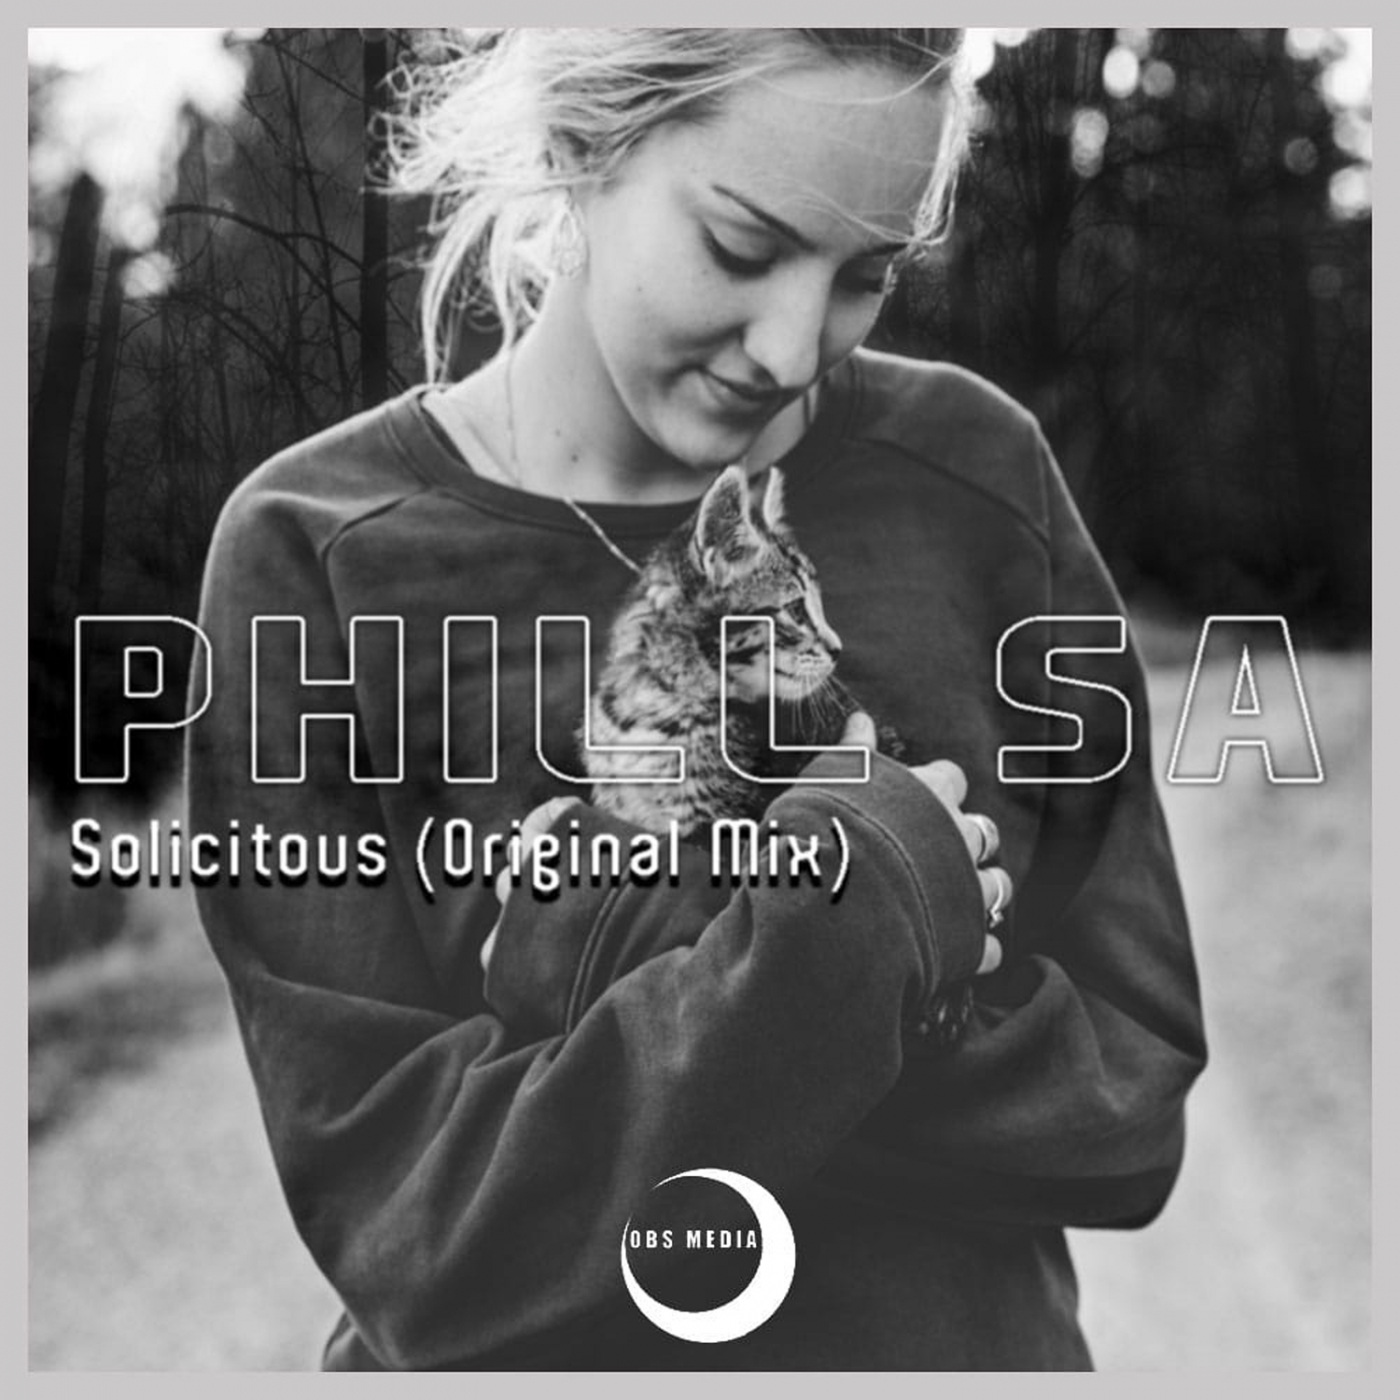 PHill SA - Solicitous / OBS Media